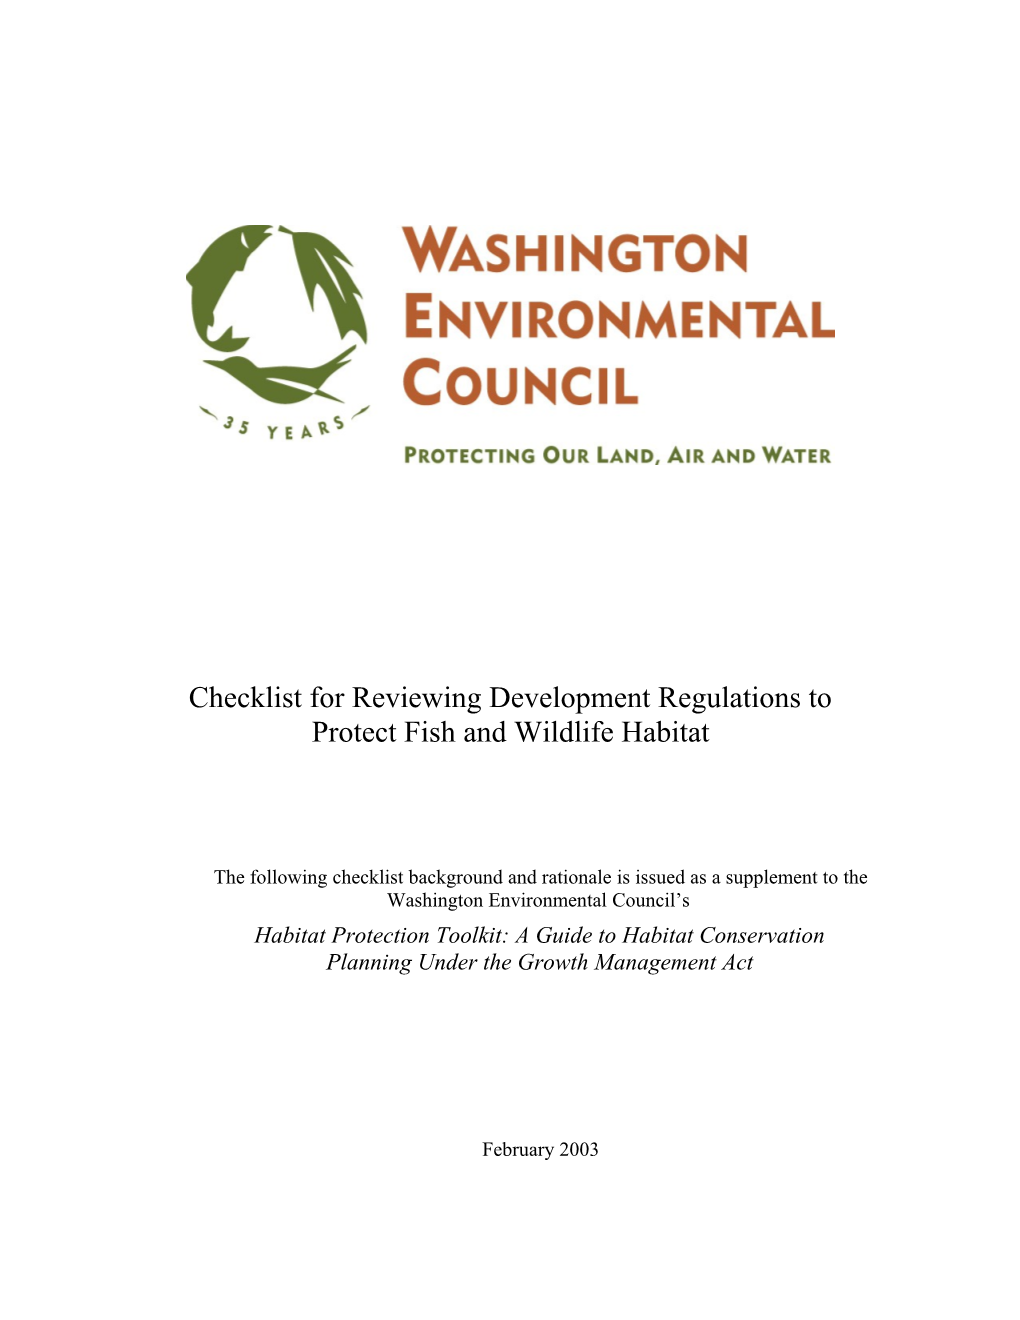 Checklist for Reviewing Development Regulations to Protect Fish and Wildlife Habitat